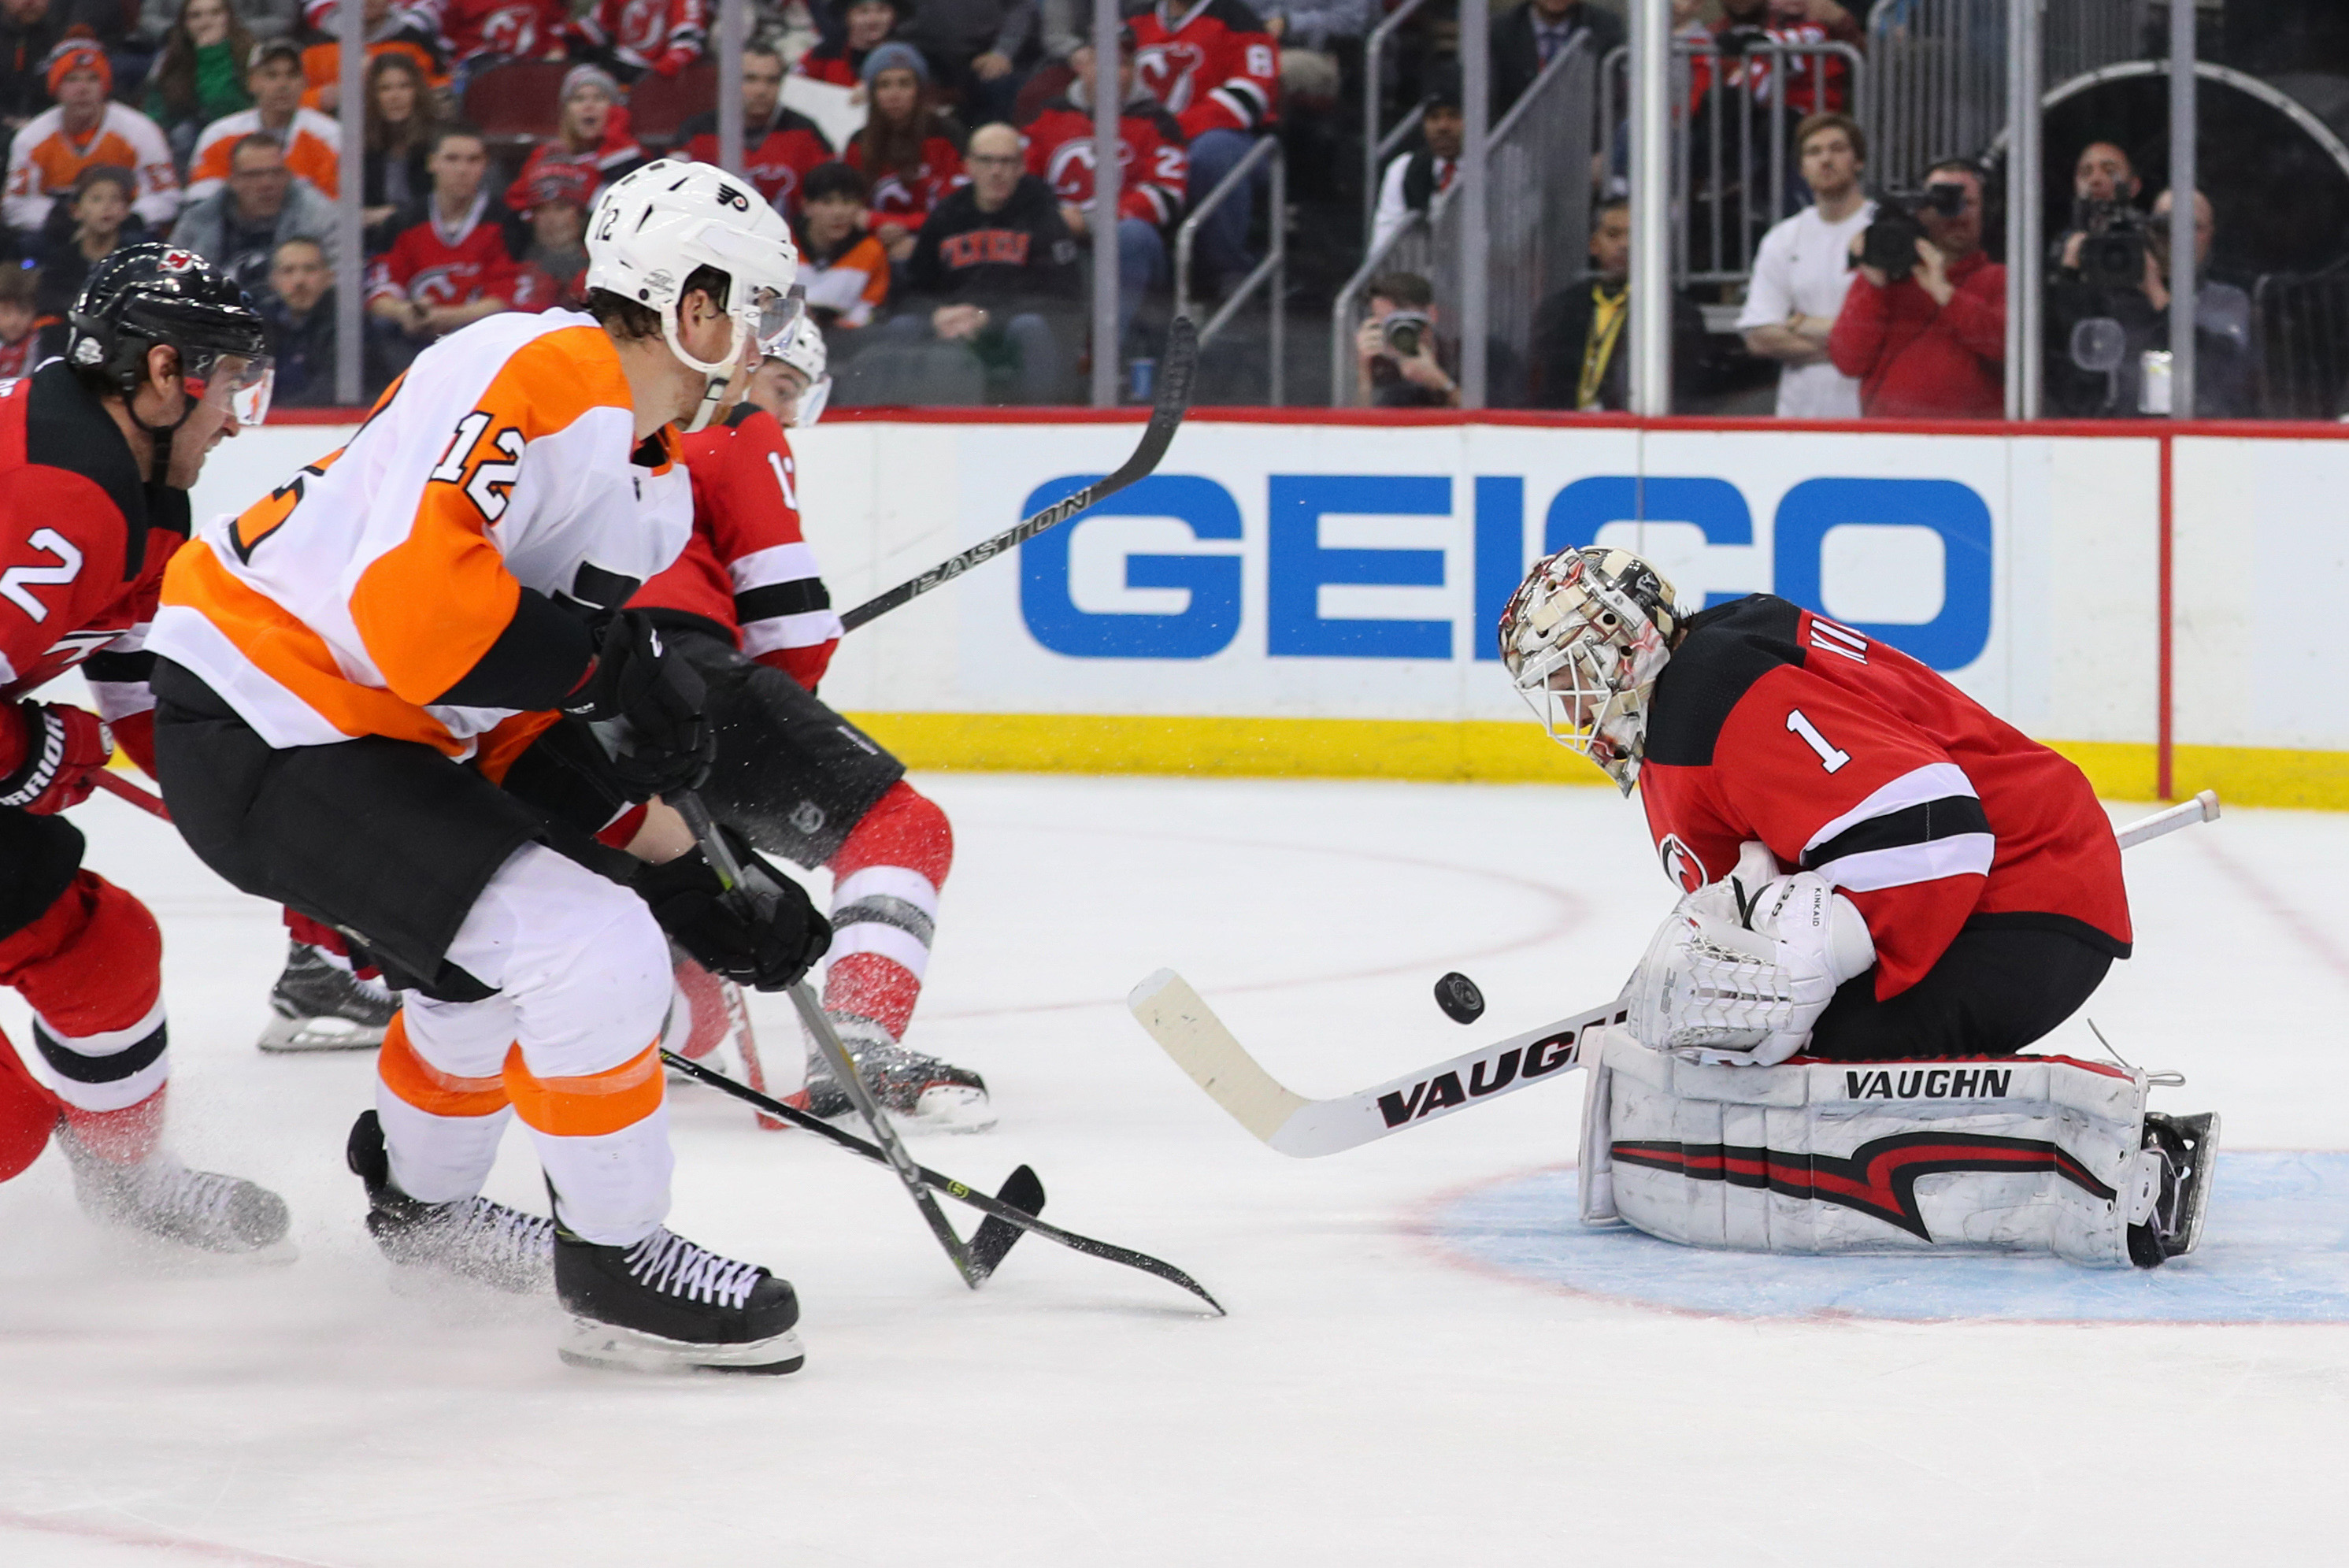 Unsustainable! Four Takeaways from the Paul Holmgren Interview and the Flyers last two losses to the Capitals and Devils